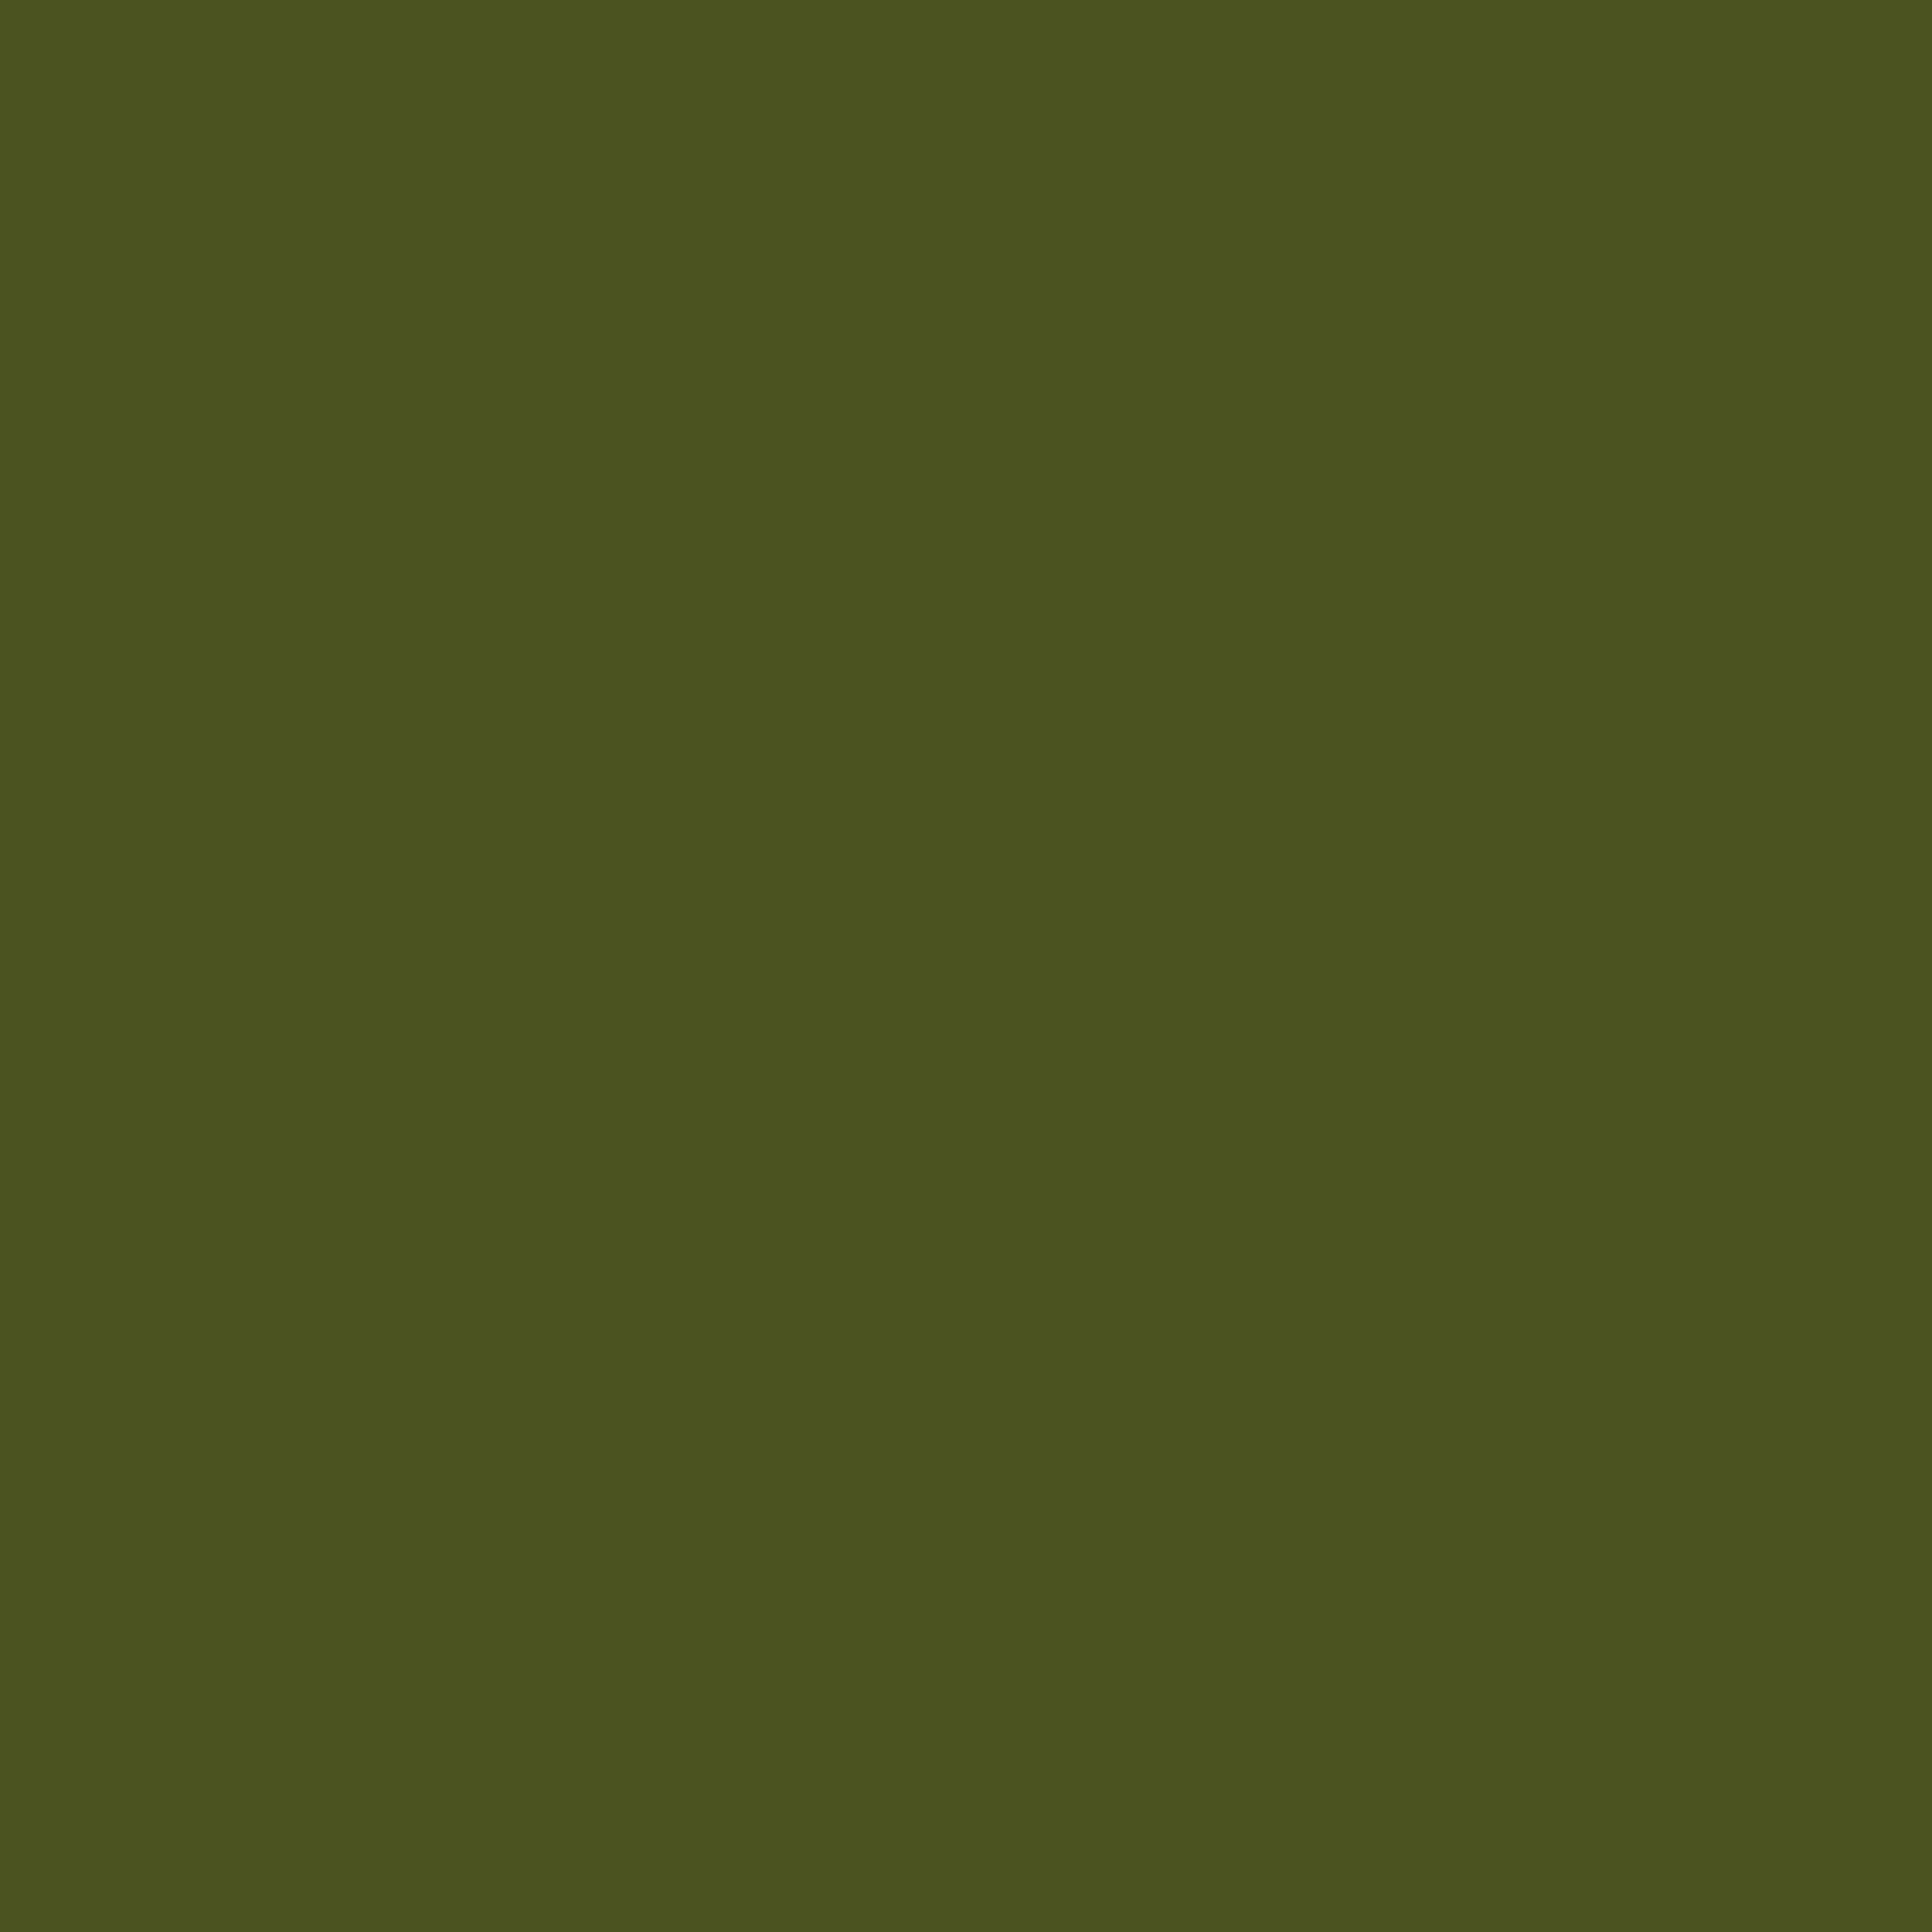 2048x2048 Army Green Solid Color Background